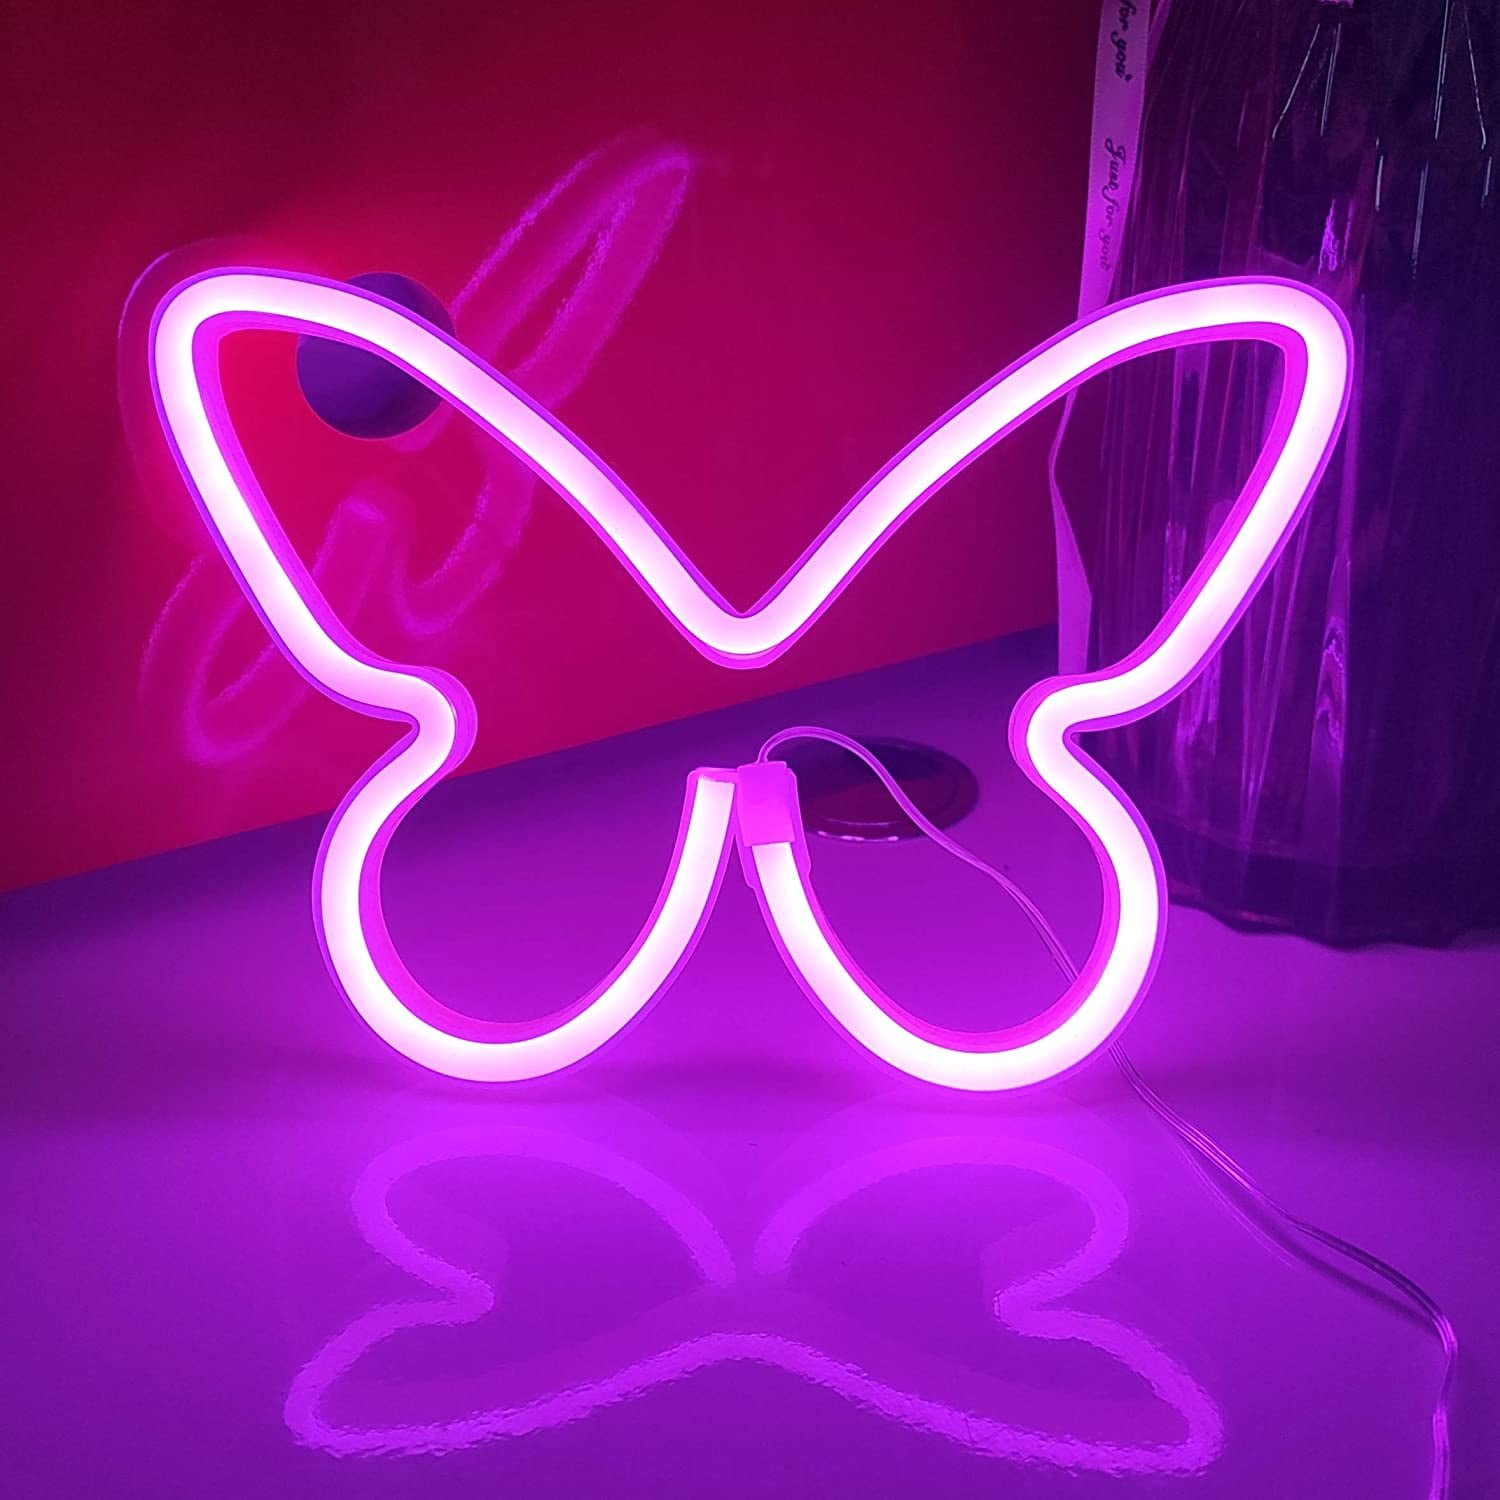 Erfly Neon Signs Battery Powered Lights For Wall Decor Pink Led Ligh Sign Light Up Bedroom Living Room Kids Birthday Party Com - Neon Light Up Wall Art